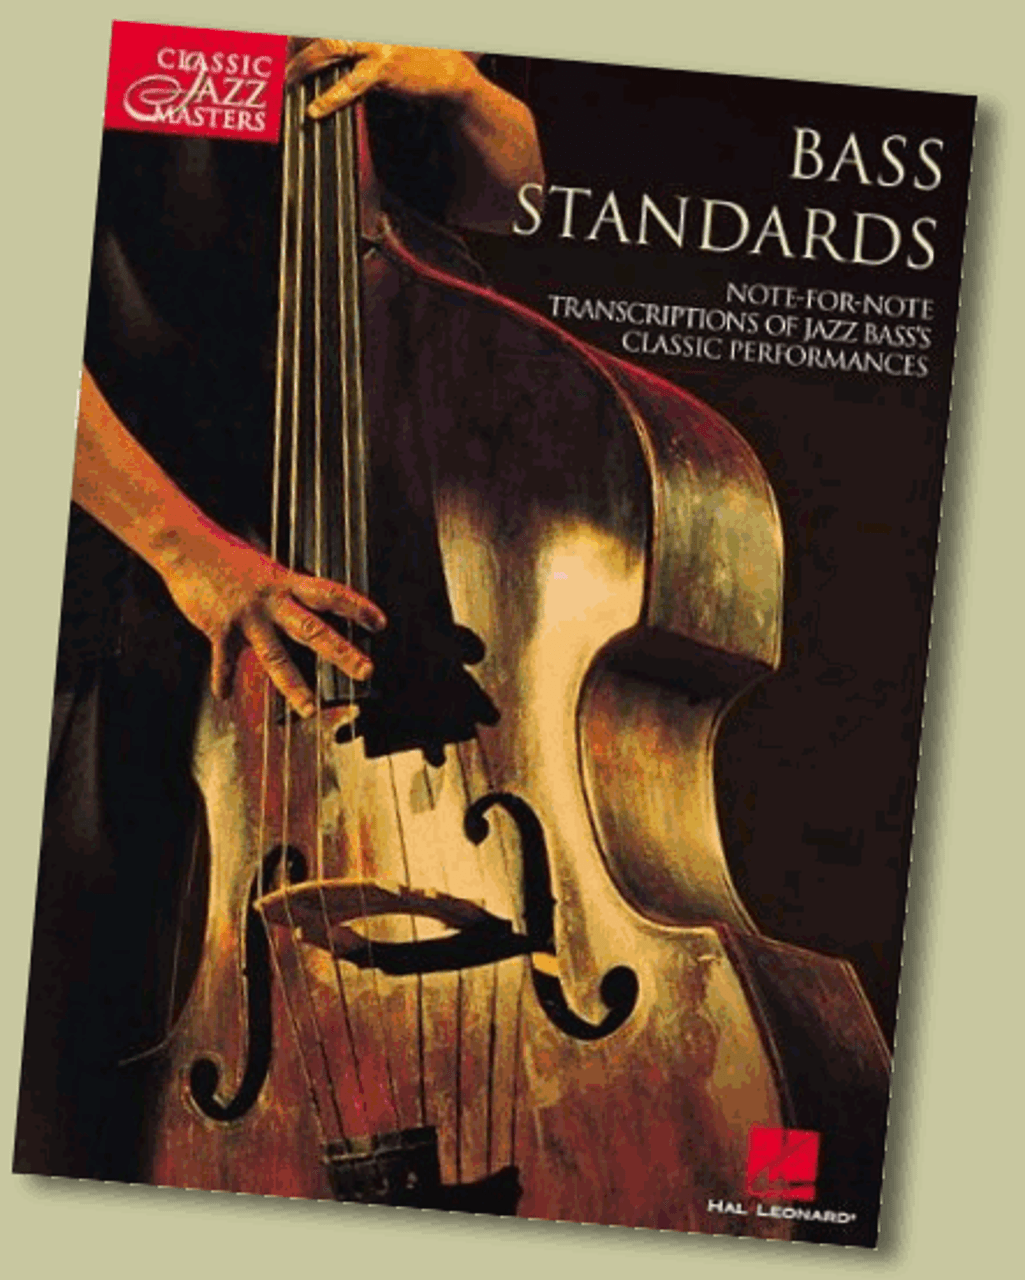 The Best Sight Reading Books for Bass - Free Bass Transcriptions